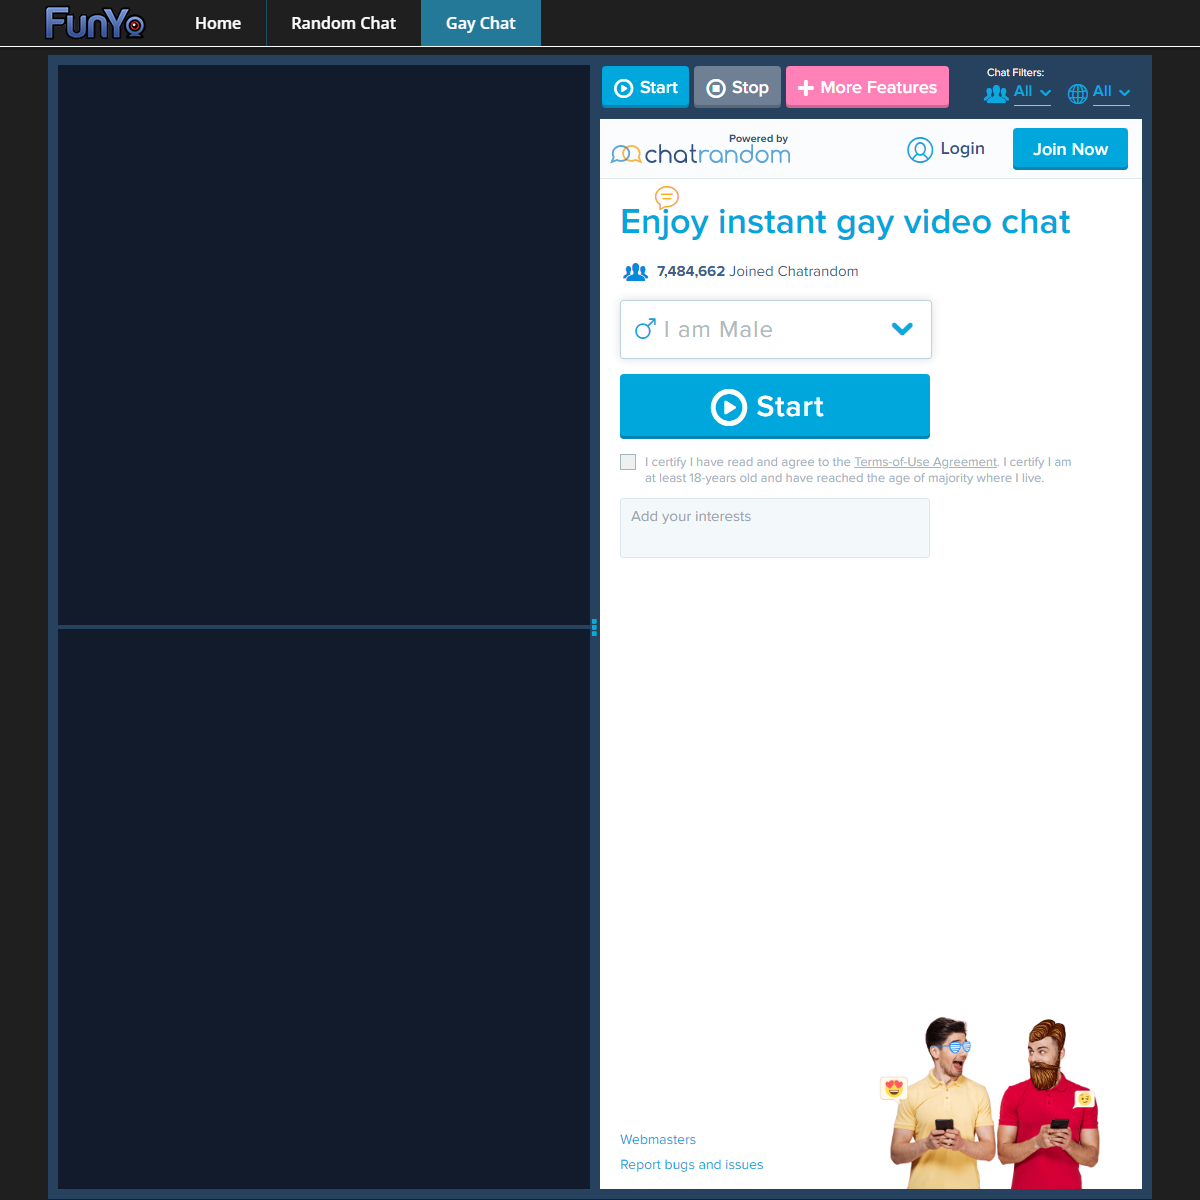 A complete backup of https://funyo.tv/gay-roulette/